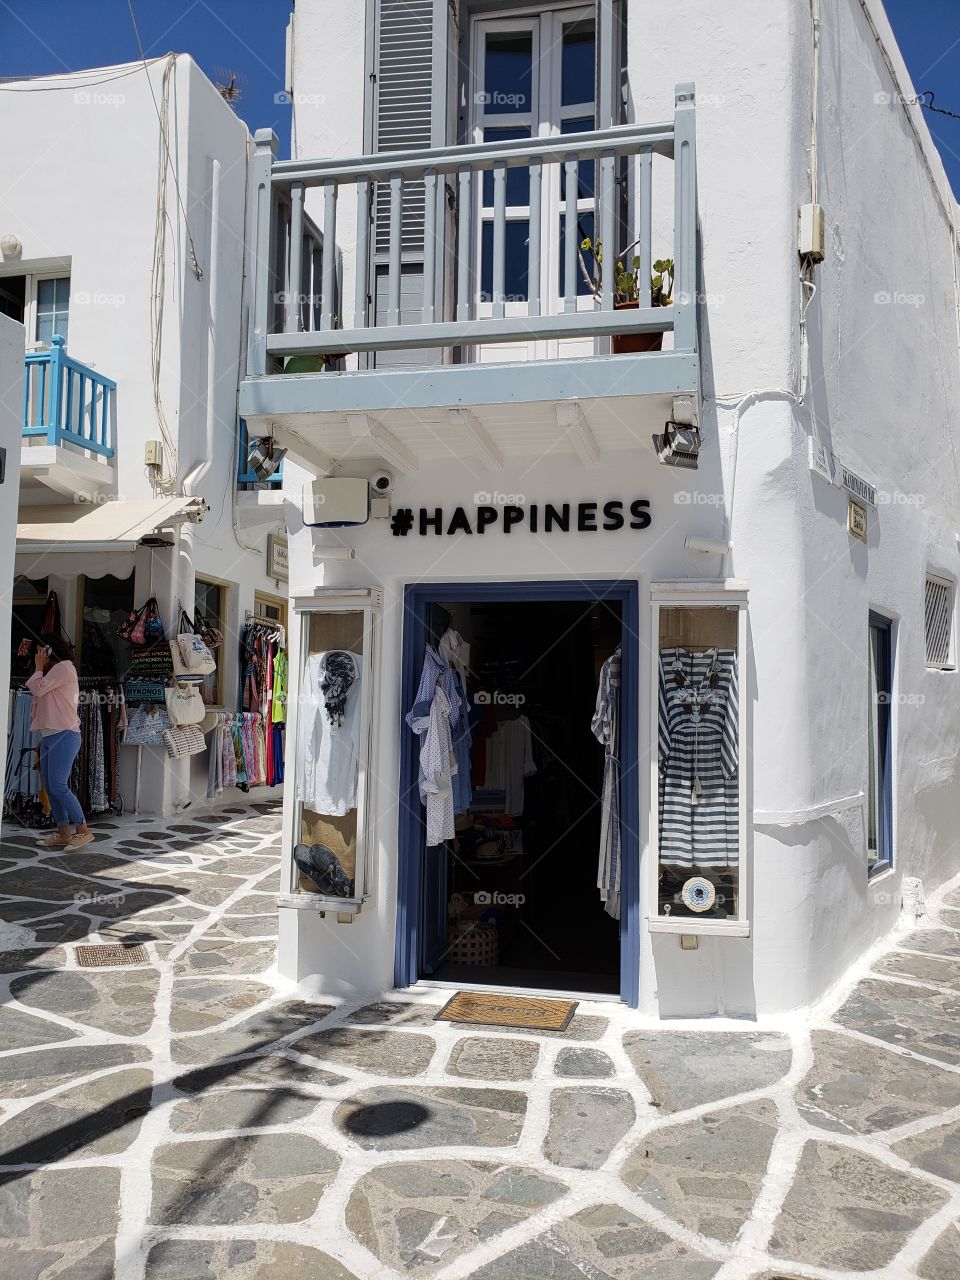 Clothing shop in Santorini, Greece by Perissa Beach #happiness